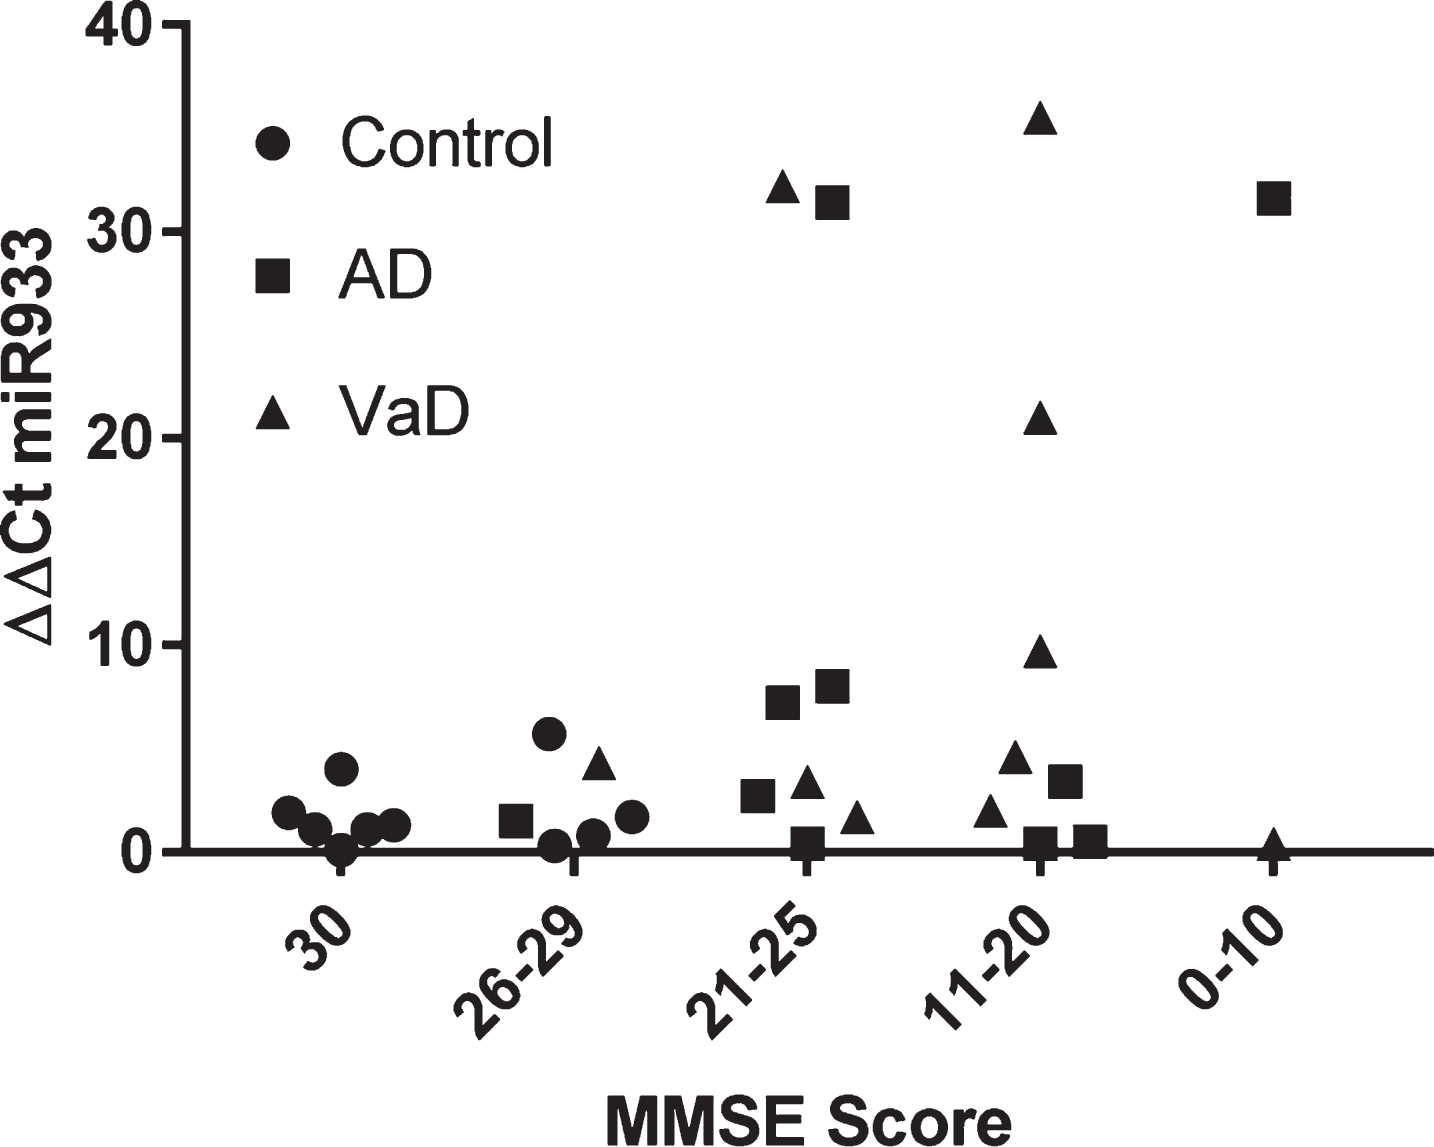 Stratification of miR 933 according to cognitive impairment represented by MMSE scores.